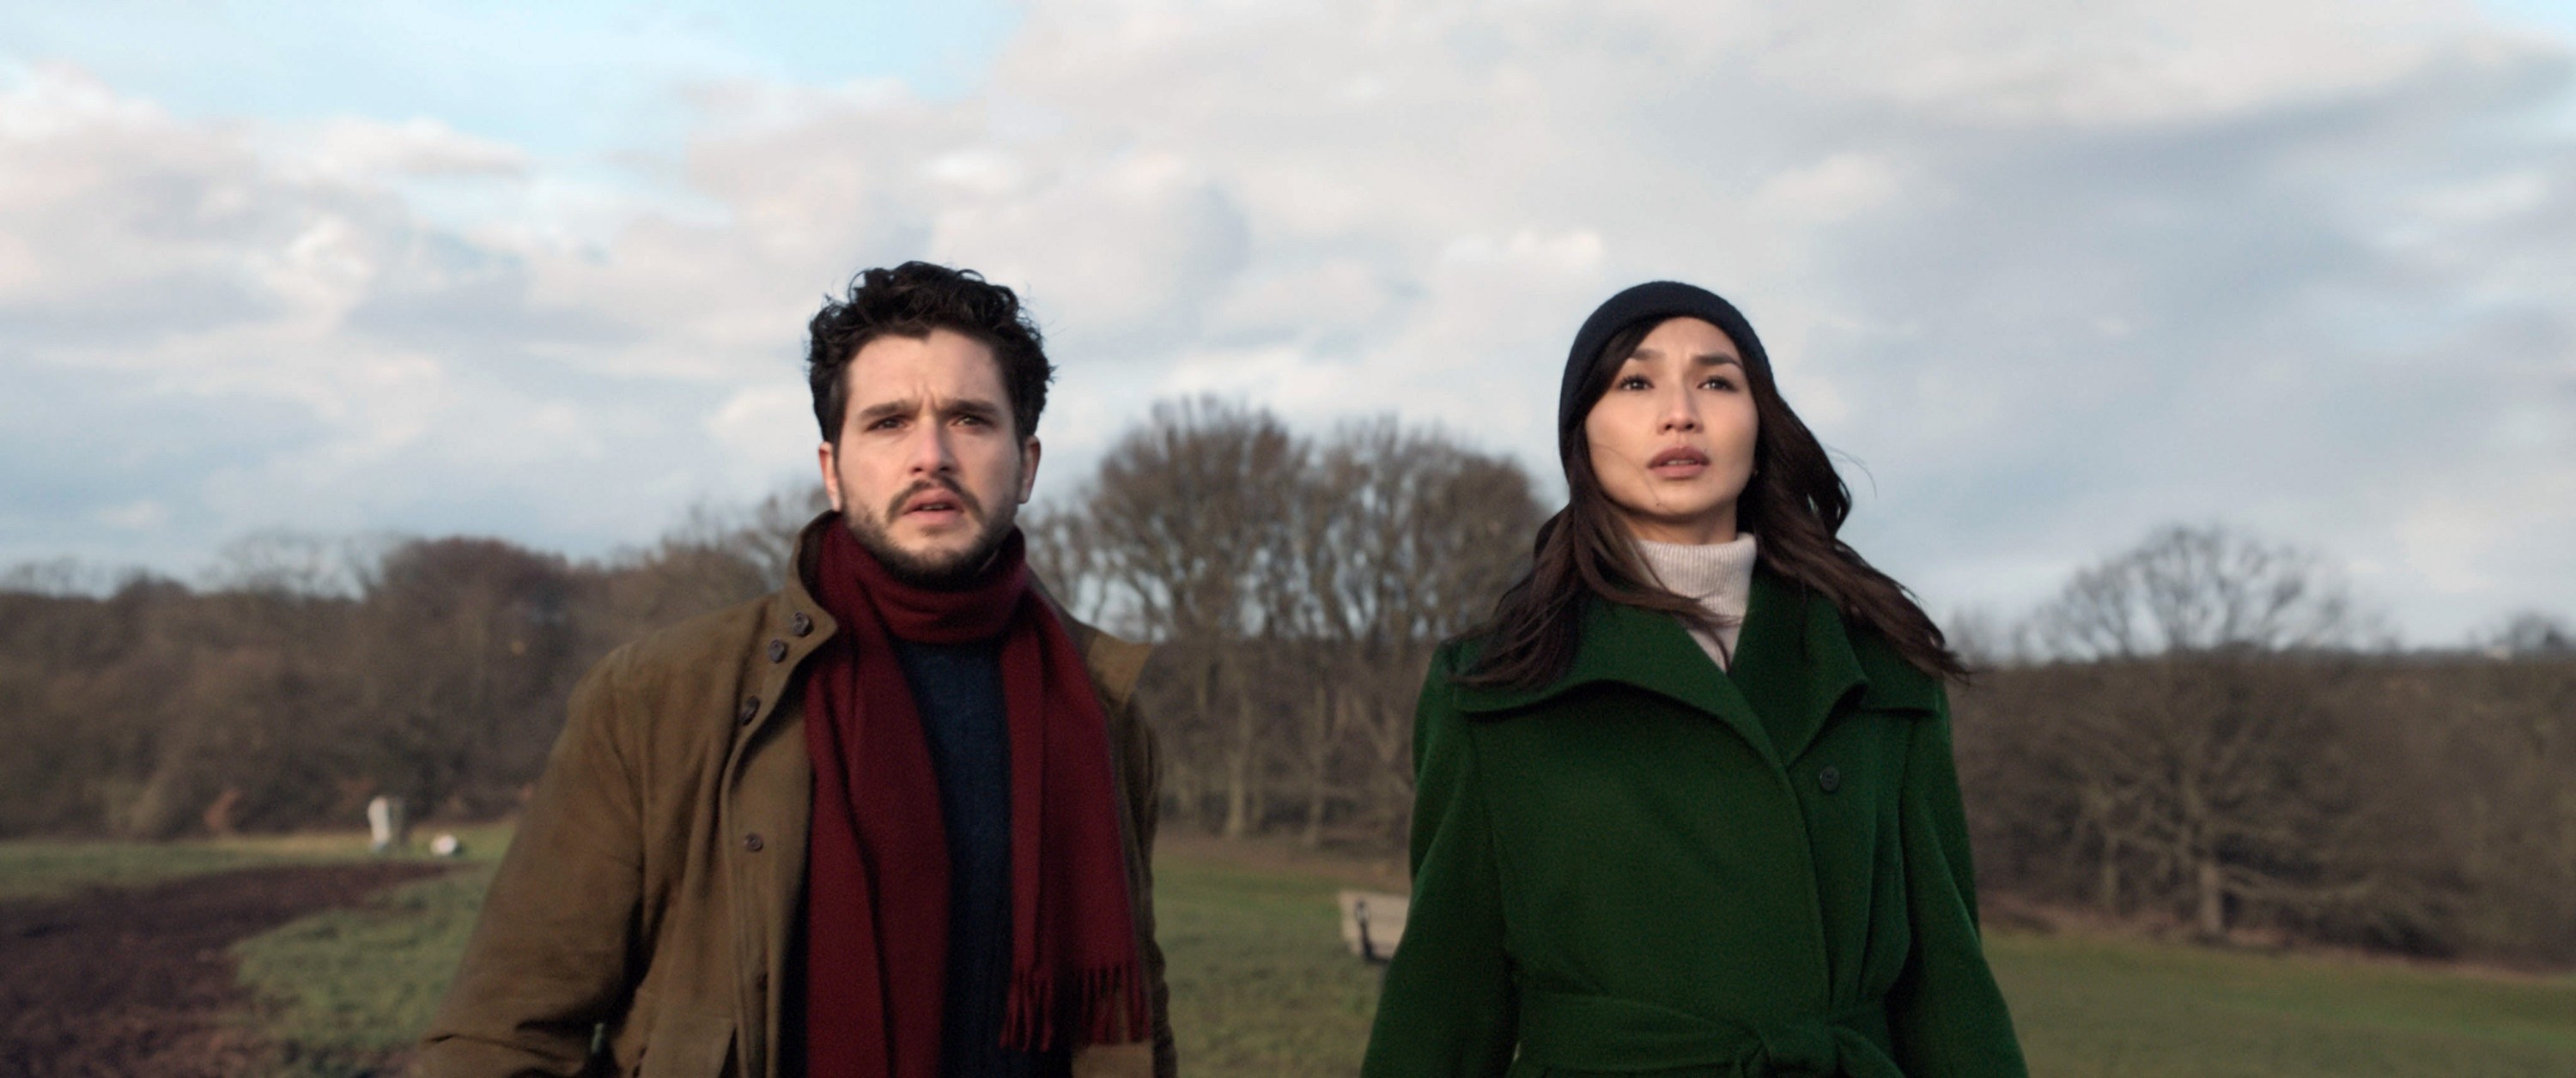 Kit and Gemma Chan, who plays Sersi, outdoors